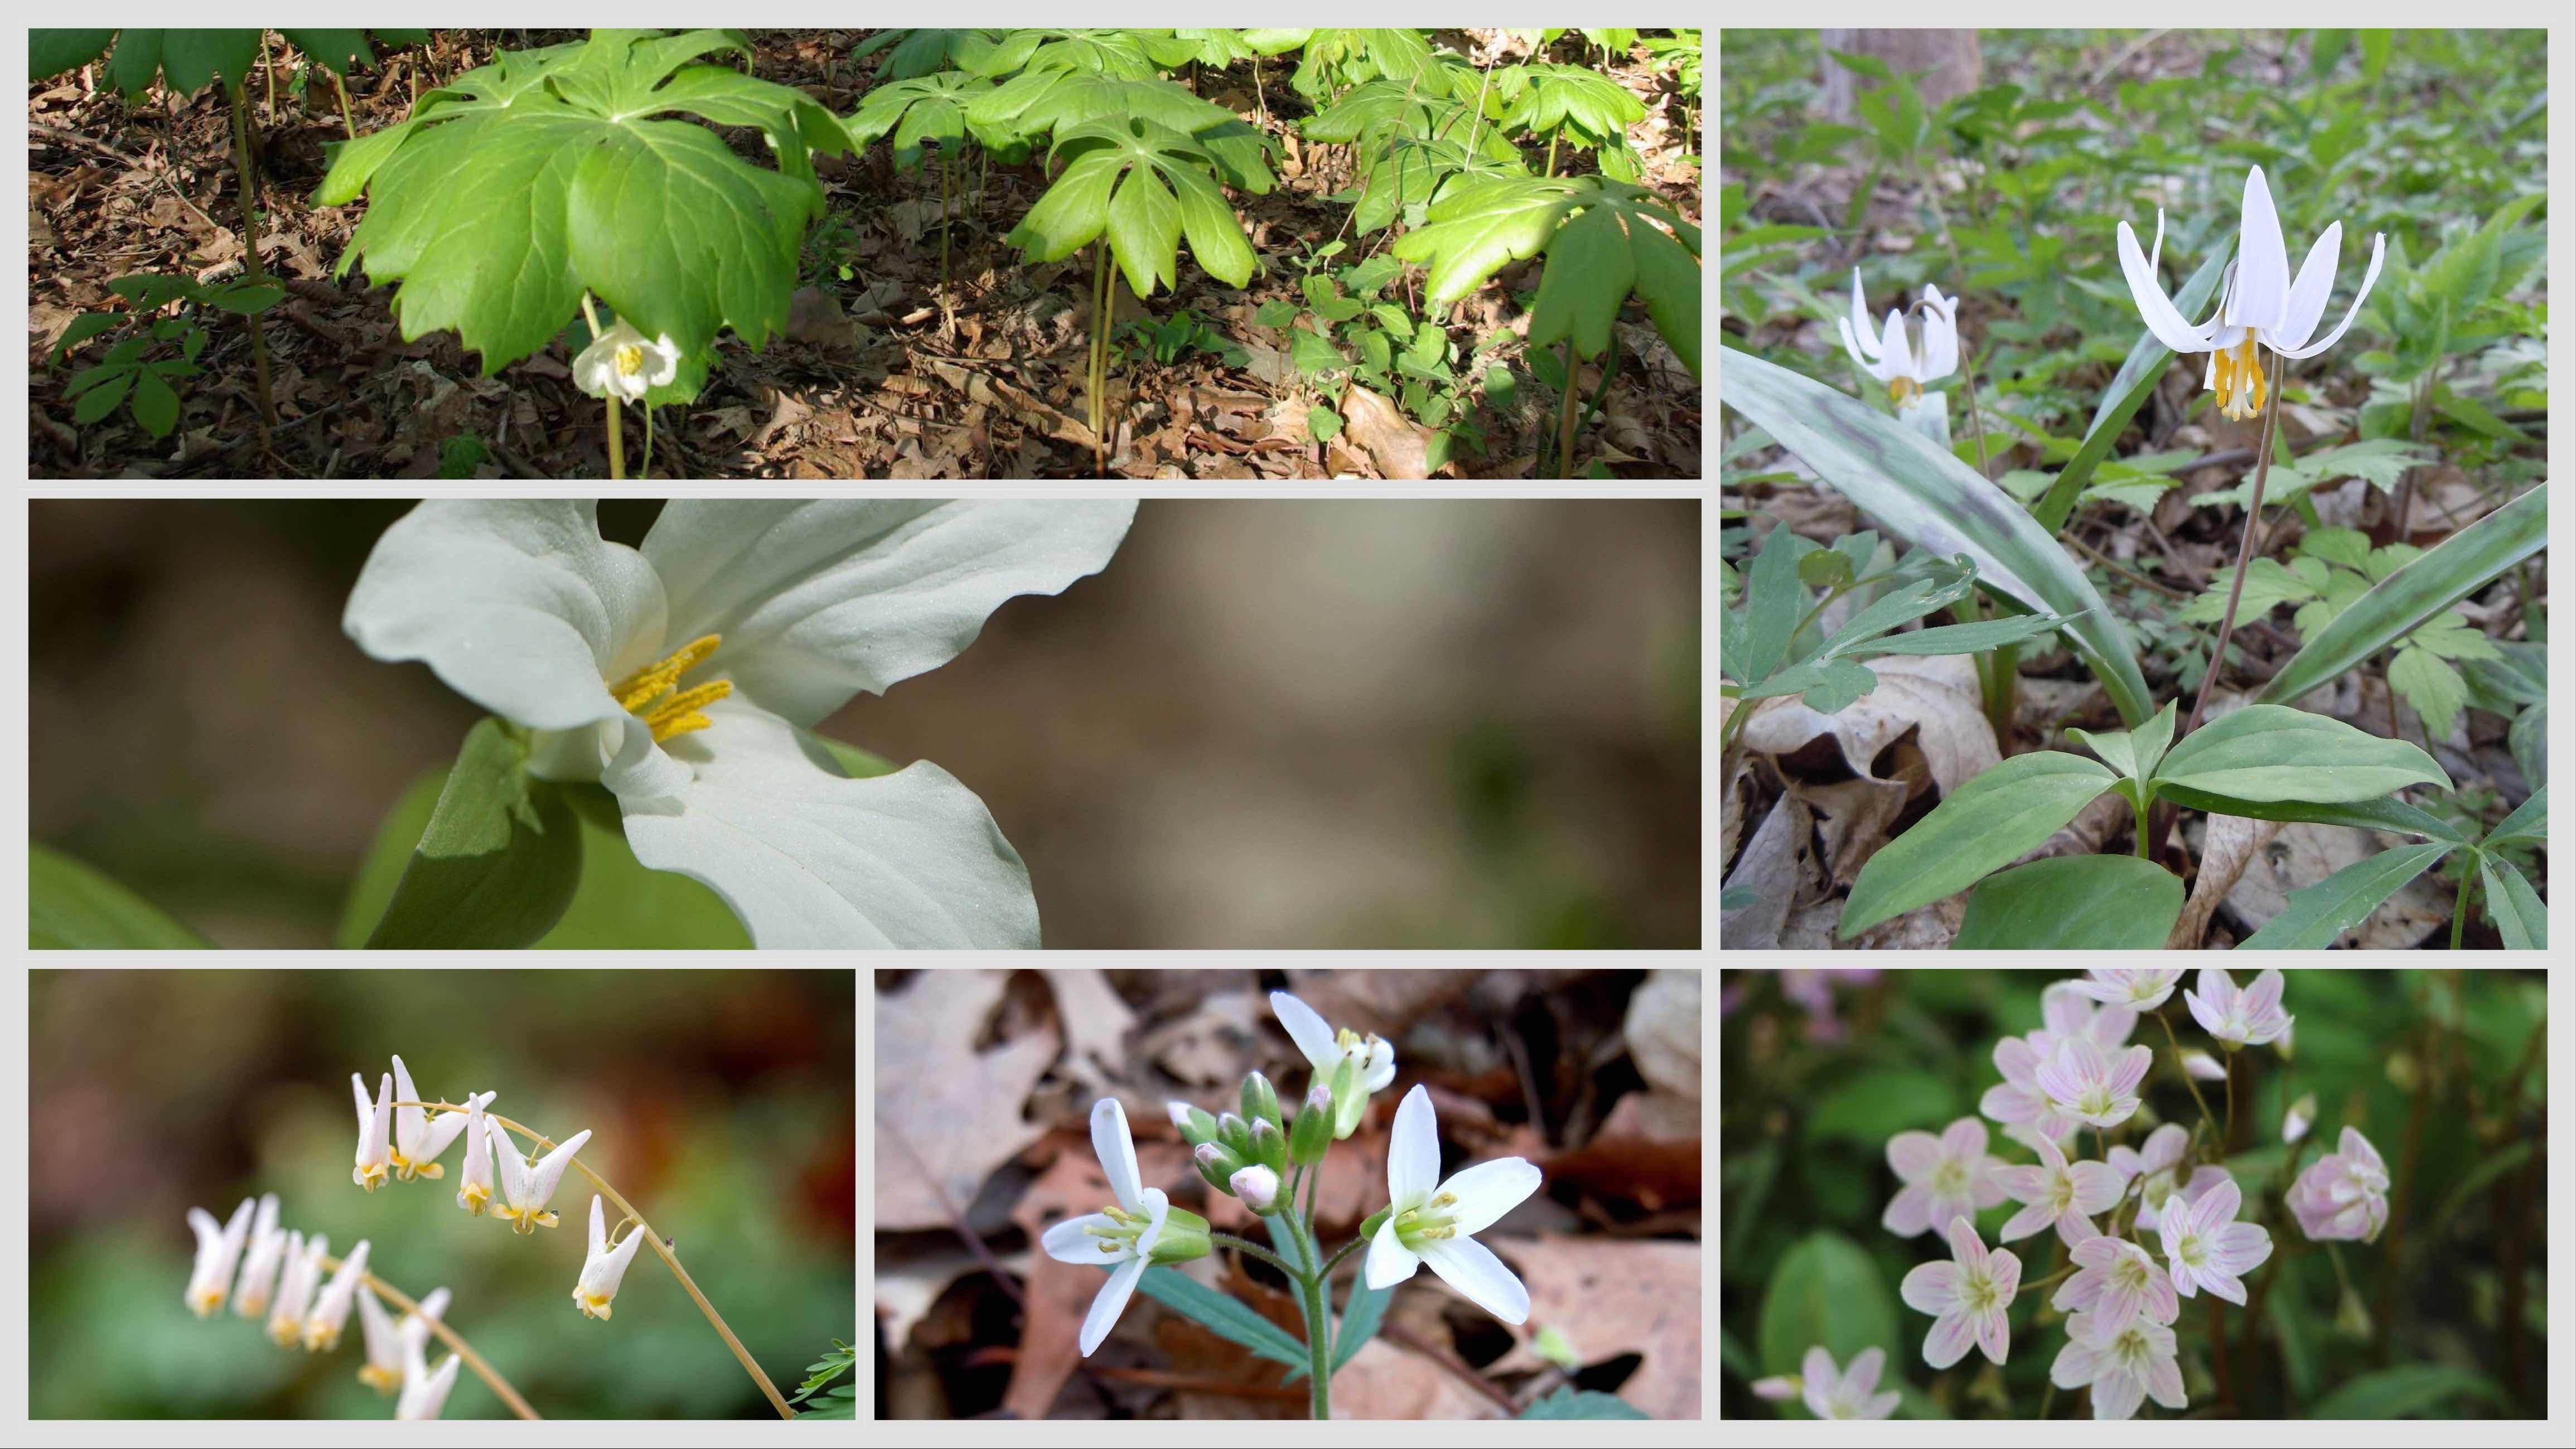 Spring ephemerals, from top left, clockwise: mayapple, trout lily, spring beauty, cutleaf toothwort, Dutchman’s breeches, trillium. (Credits: Pam Morgan / Flickr Creative Commons; U.S. Fish & Wildlife Service / Jessica Bolser; Forest Preserve District of Cook County; U.S. Fish & Wildlife Service / Jessica Bolser; Shenandoah National Park / N. Lewis; Unsplash)